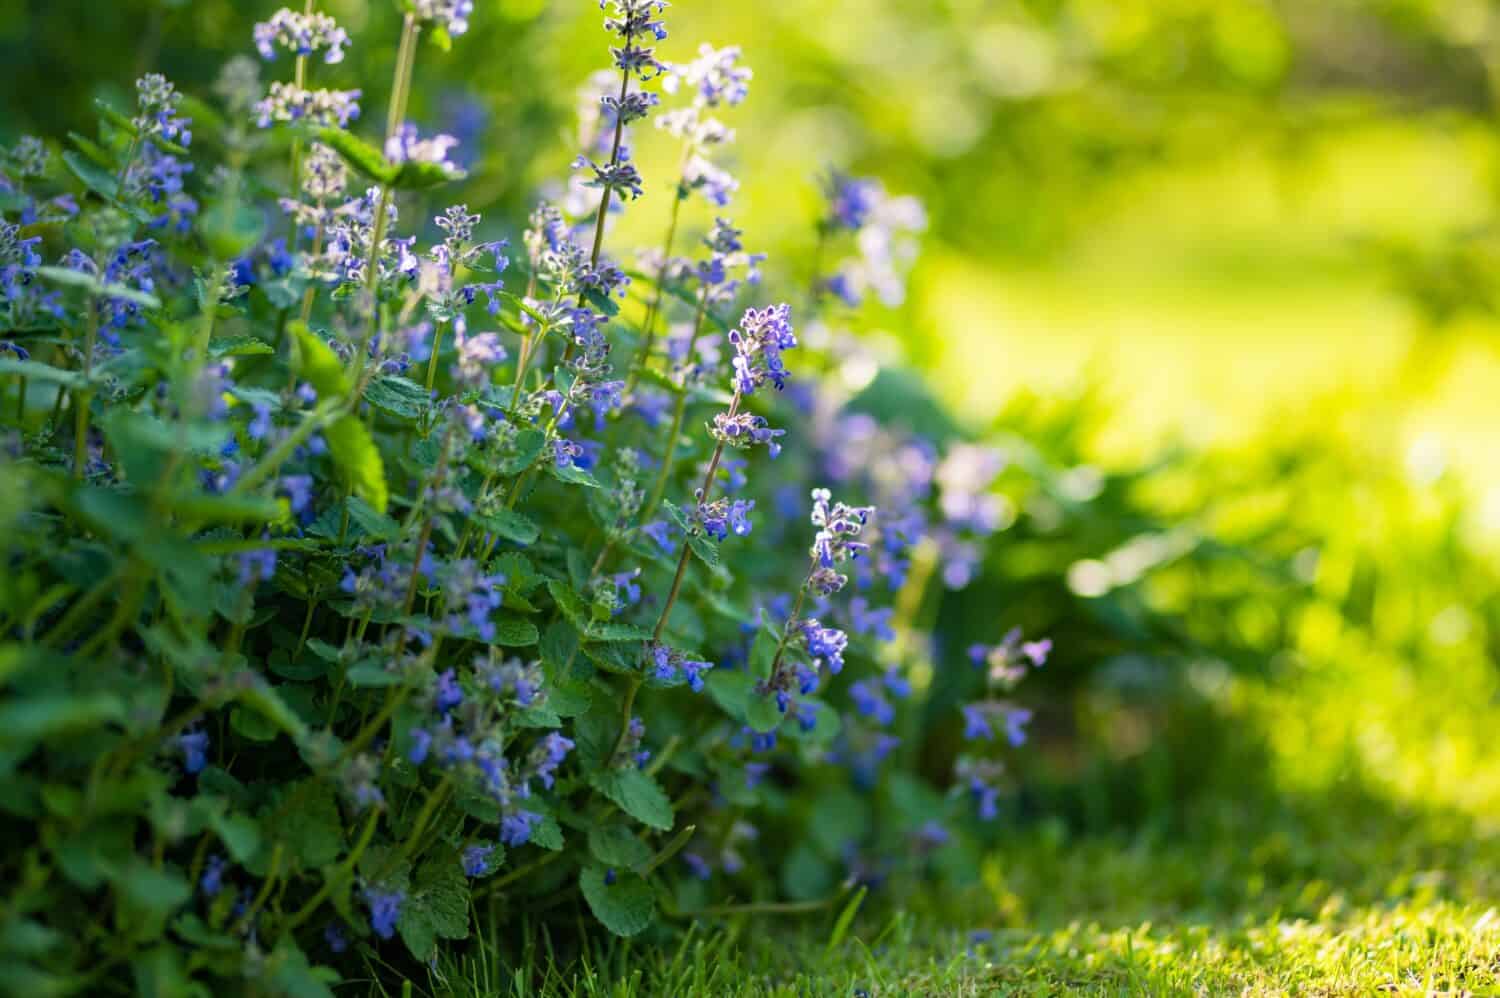 Catnip flowers (Nepeta cataria) blossoming in a garden on sunny summer day. Beauty in nature.